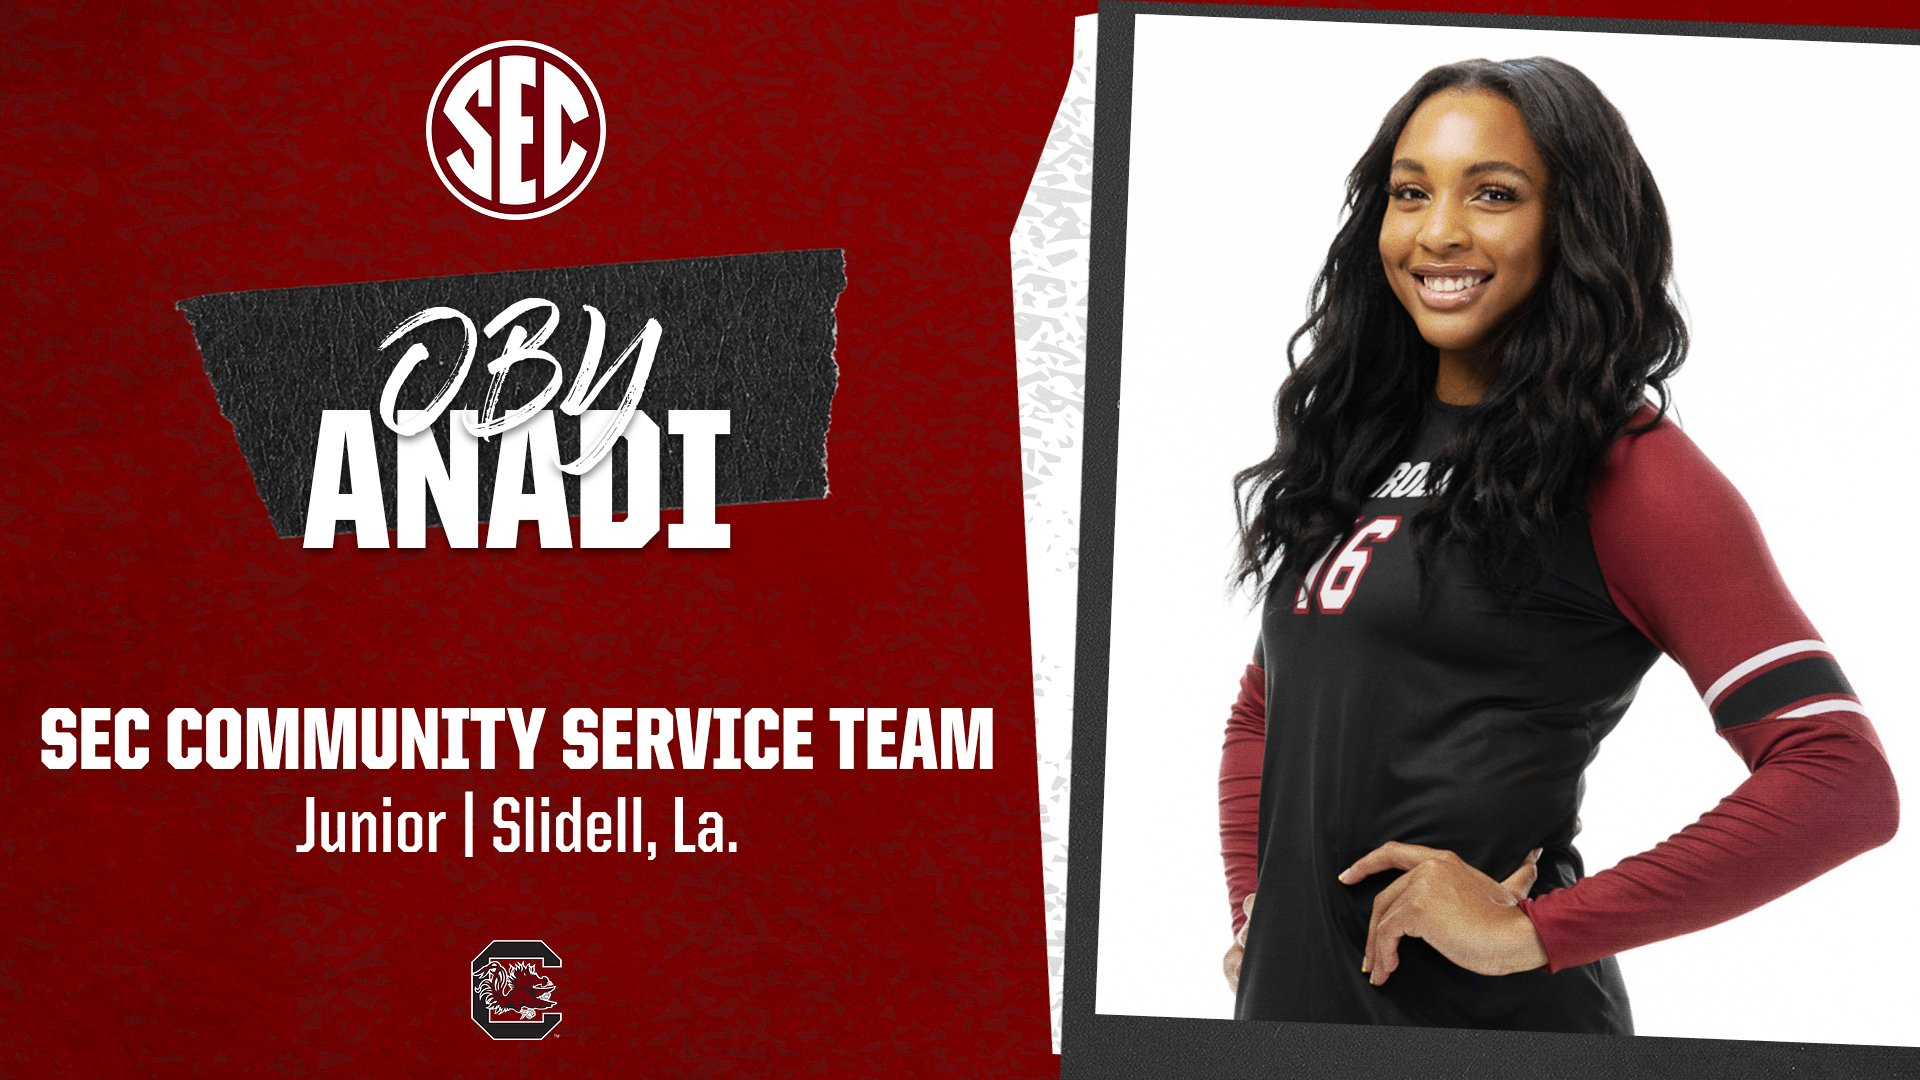 Oby Anadi Earns Place on SEC Volleyball Community Service Team